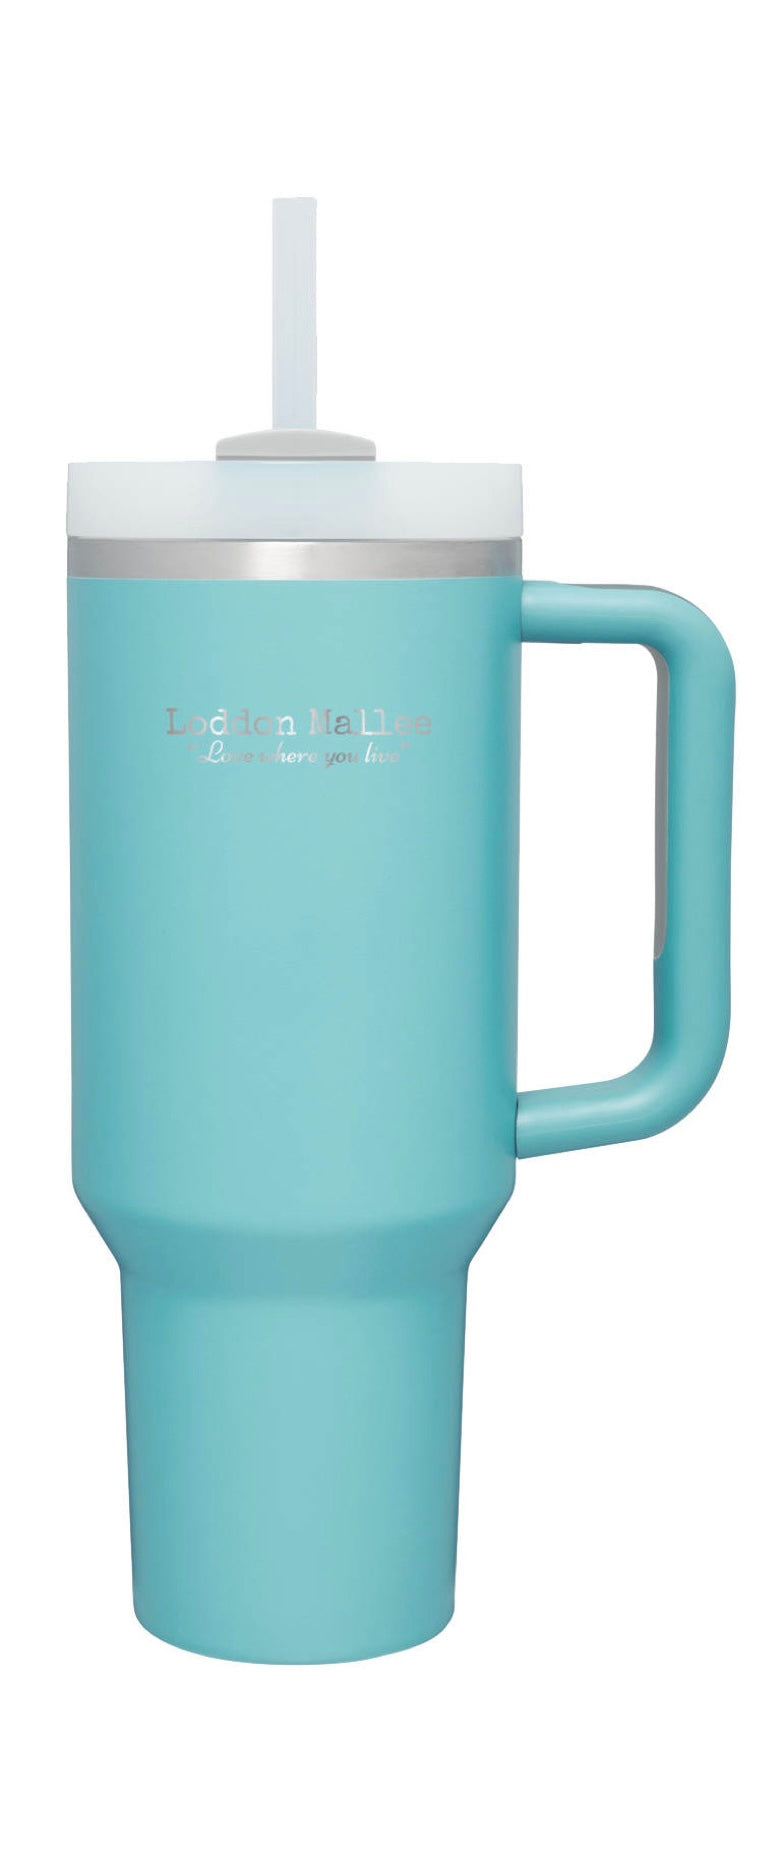 Stainless Steel Loddon Mallee 2.0 Travel Cup 40oz